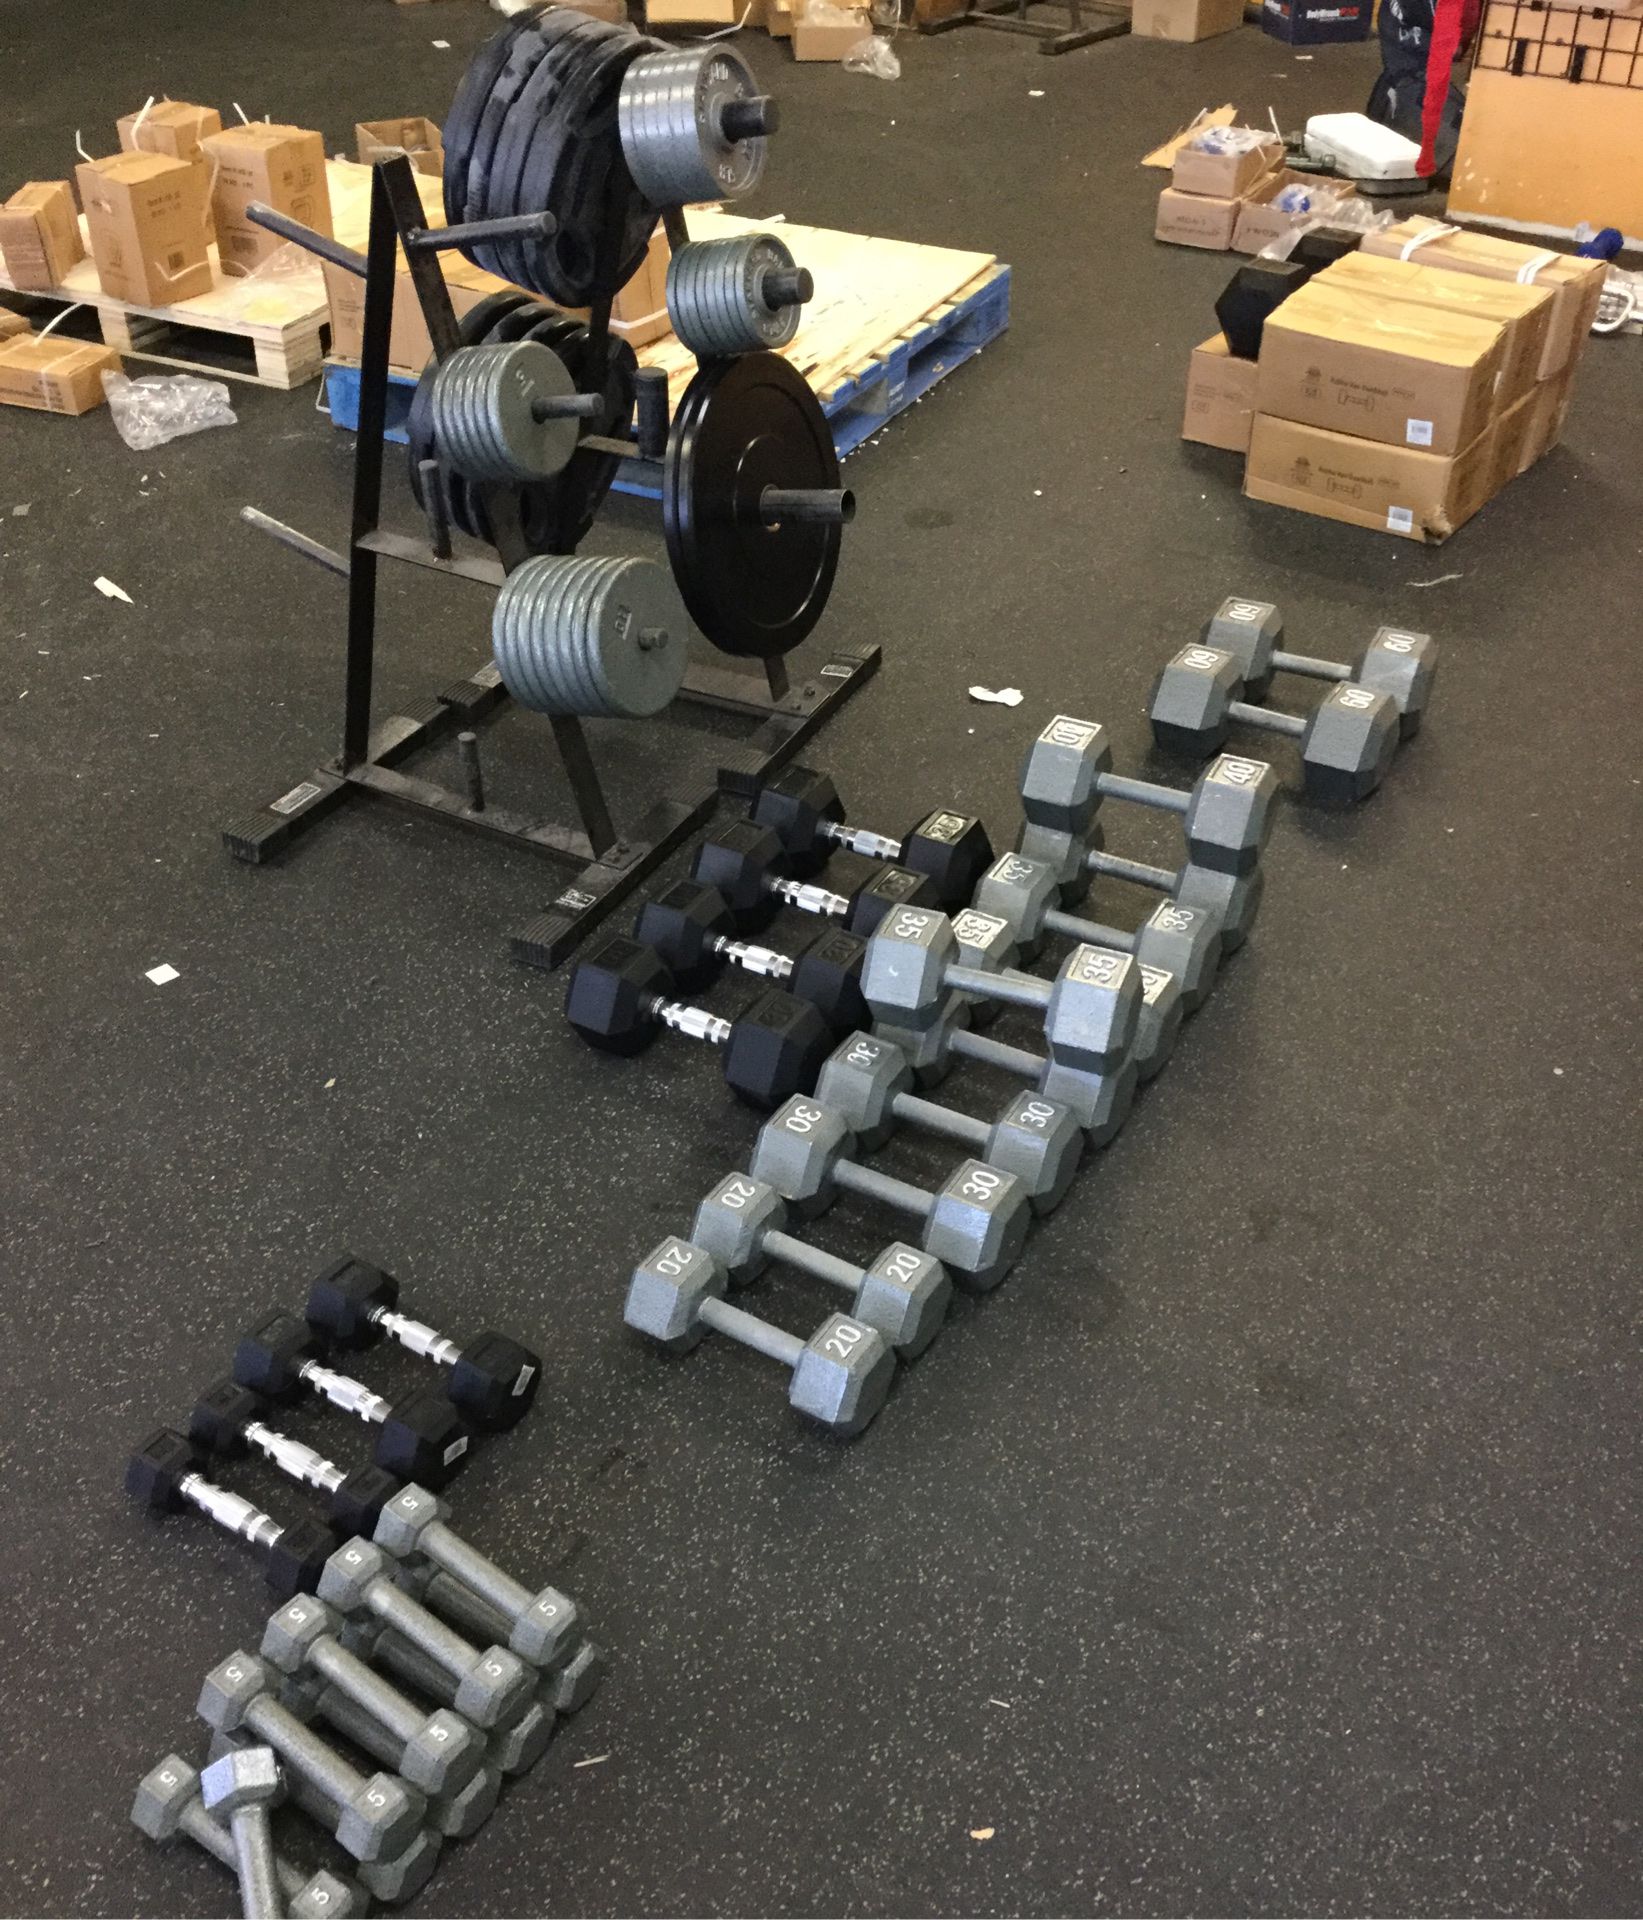 Hex dumbbells and plate weight brand new in stock limited quantities left